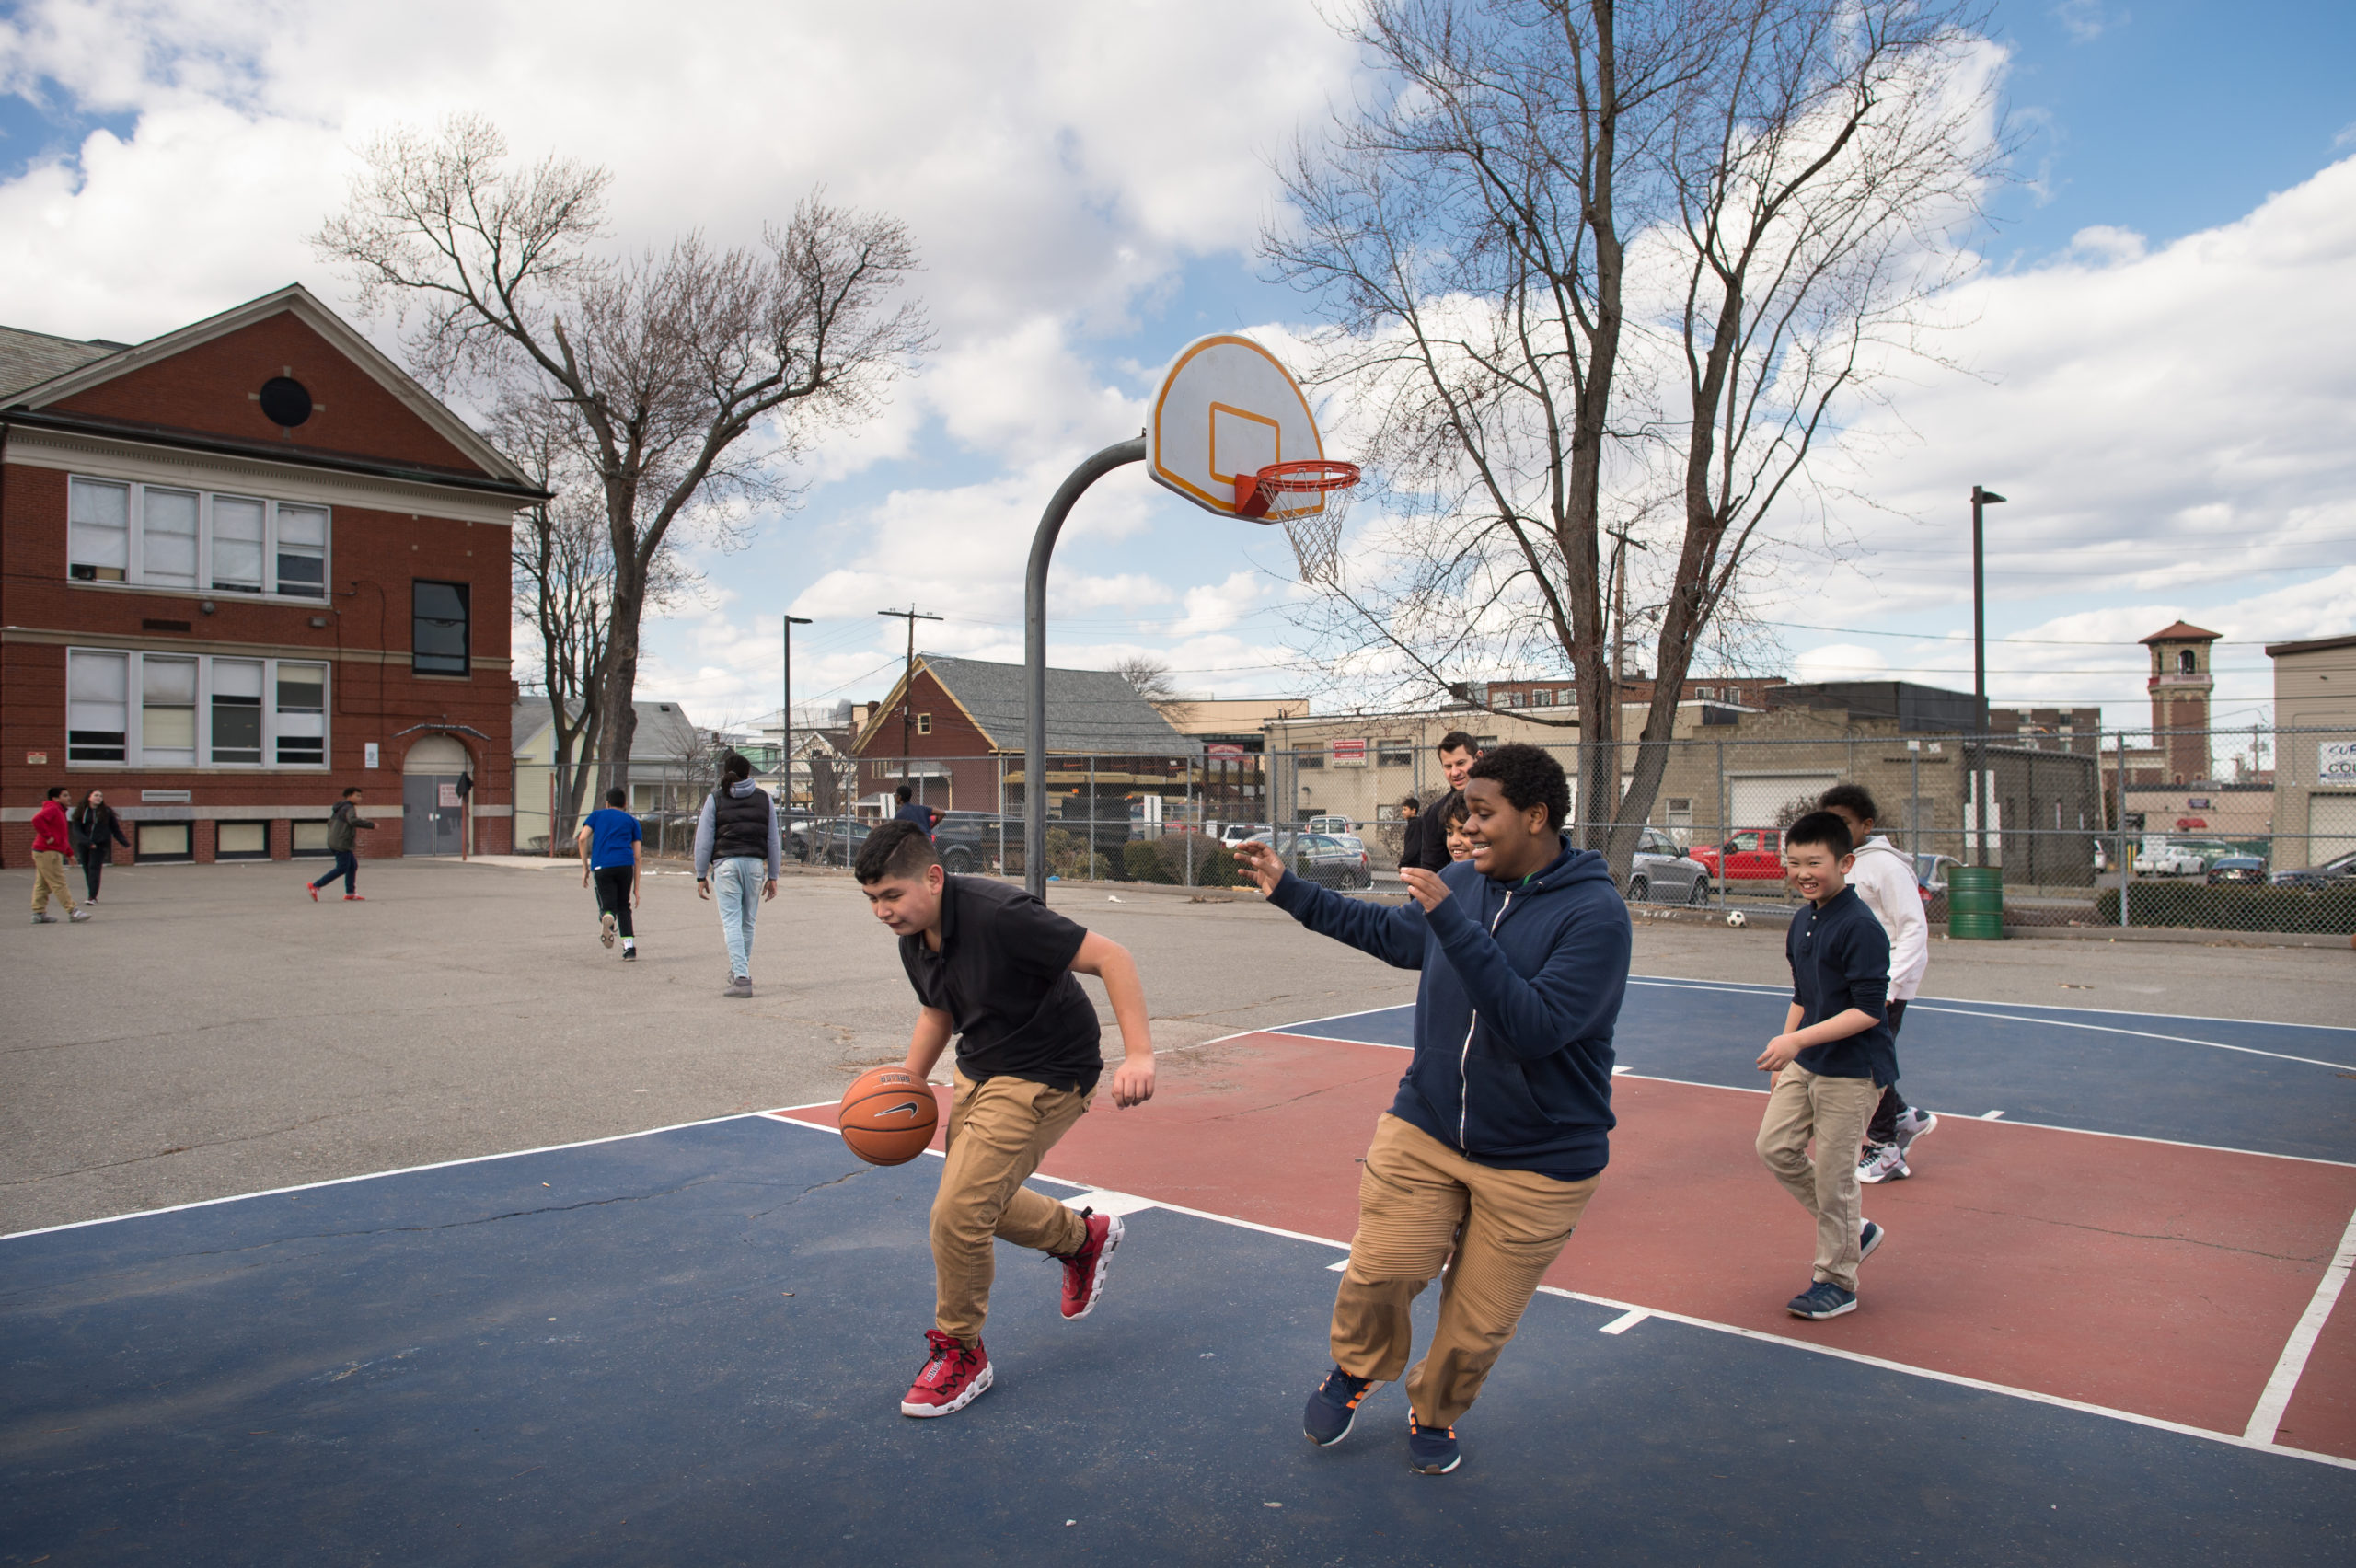 Afterschool youth group playing basketball in Revere, MA